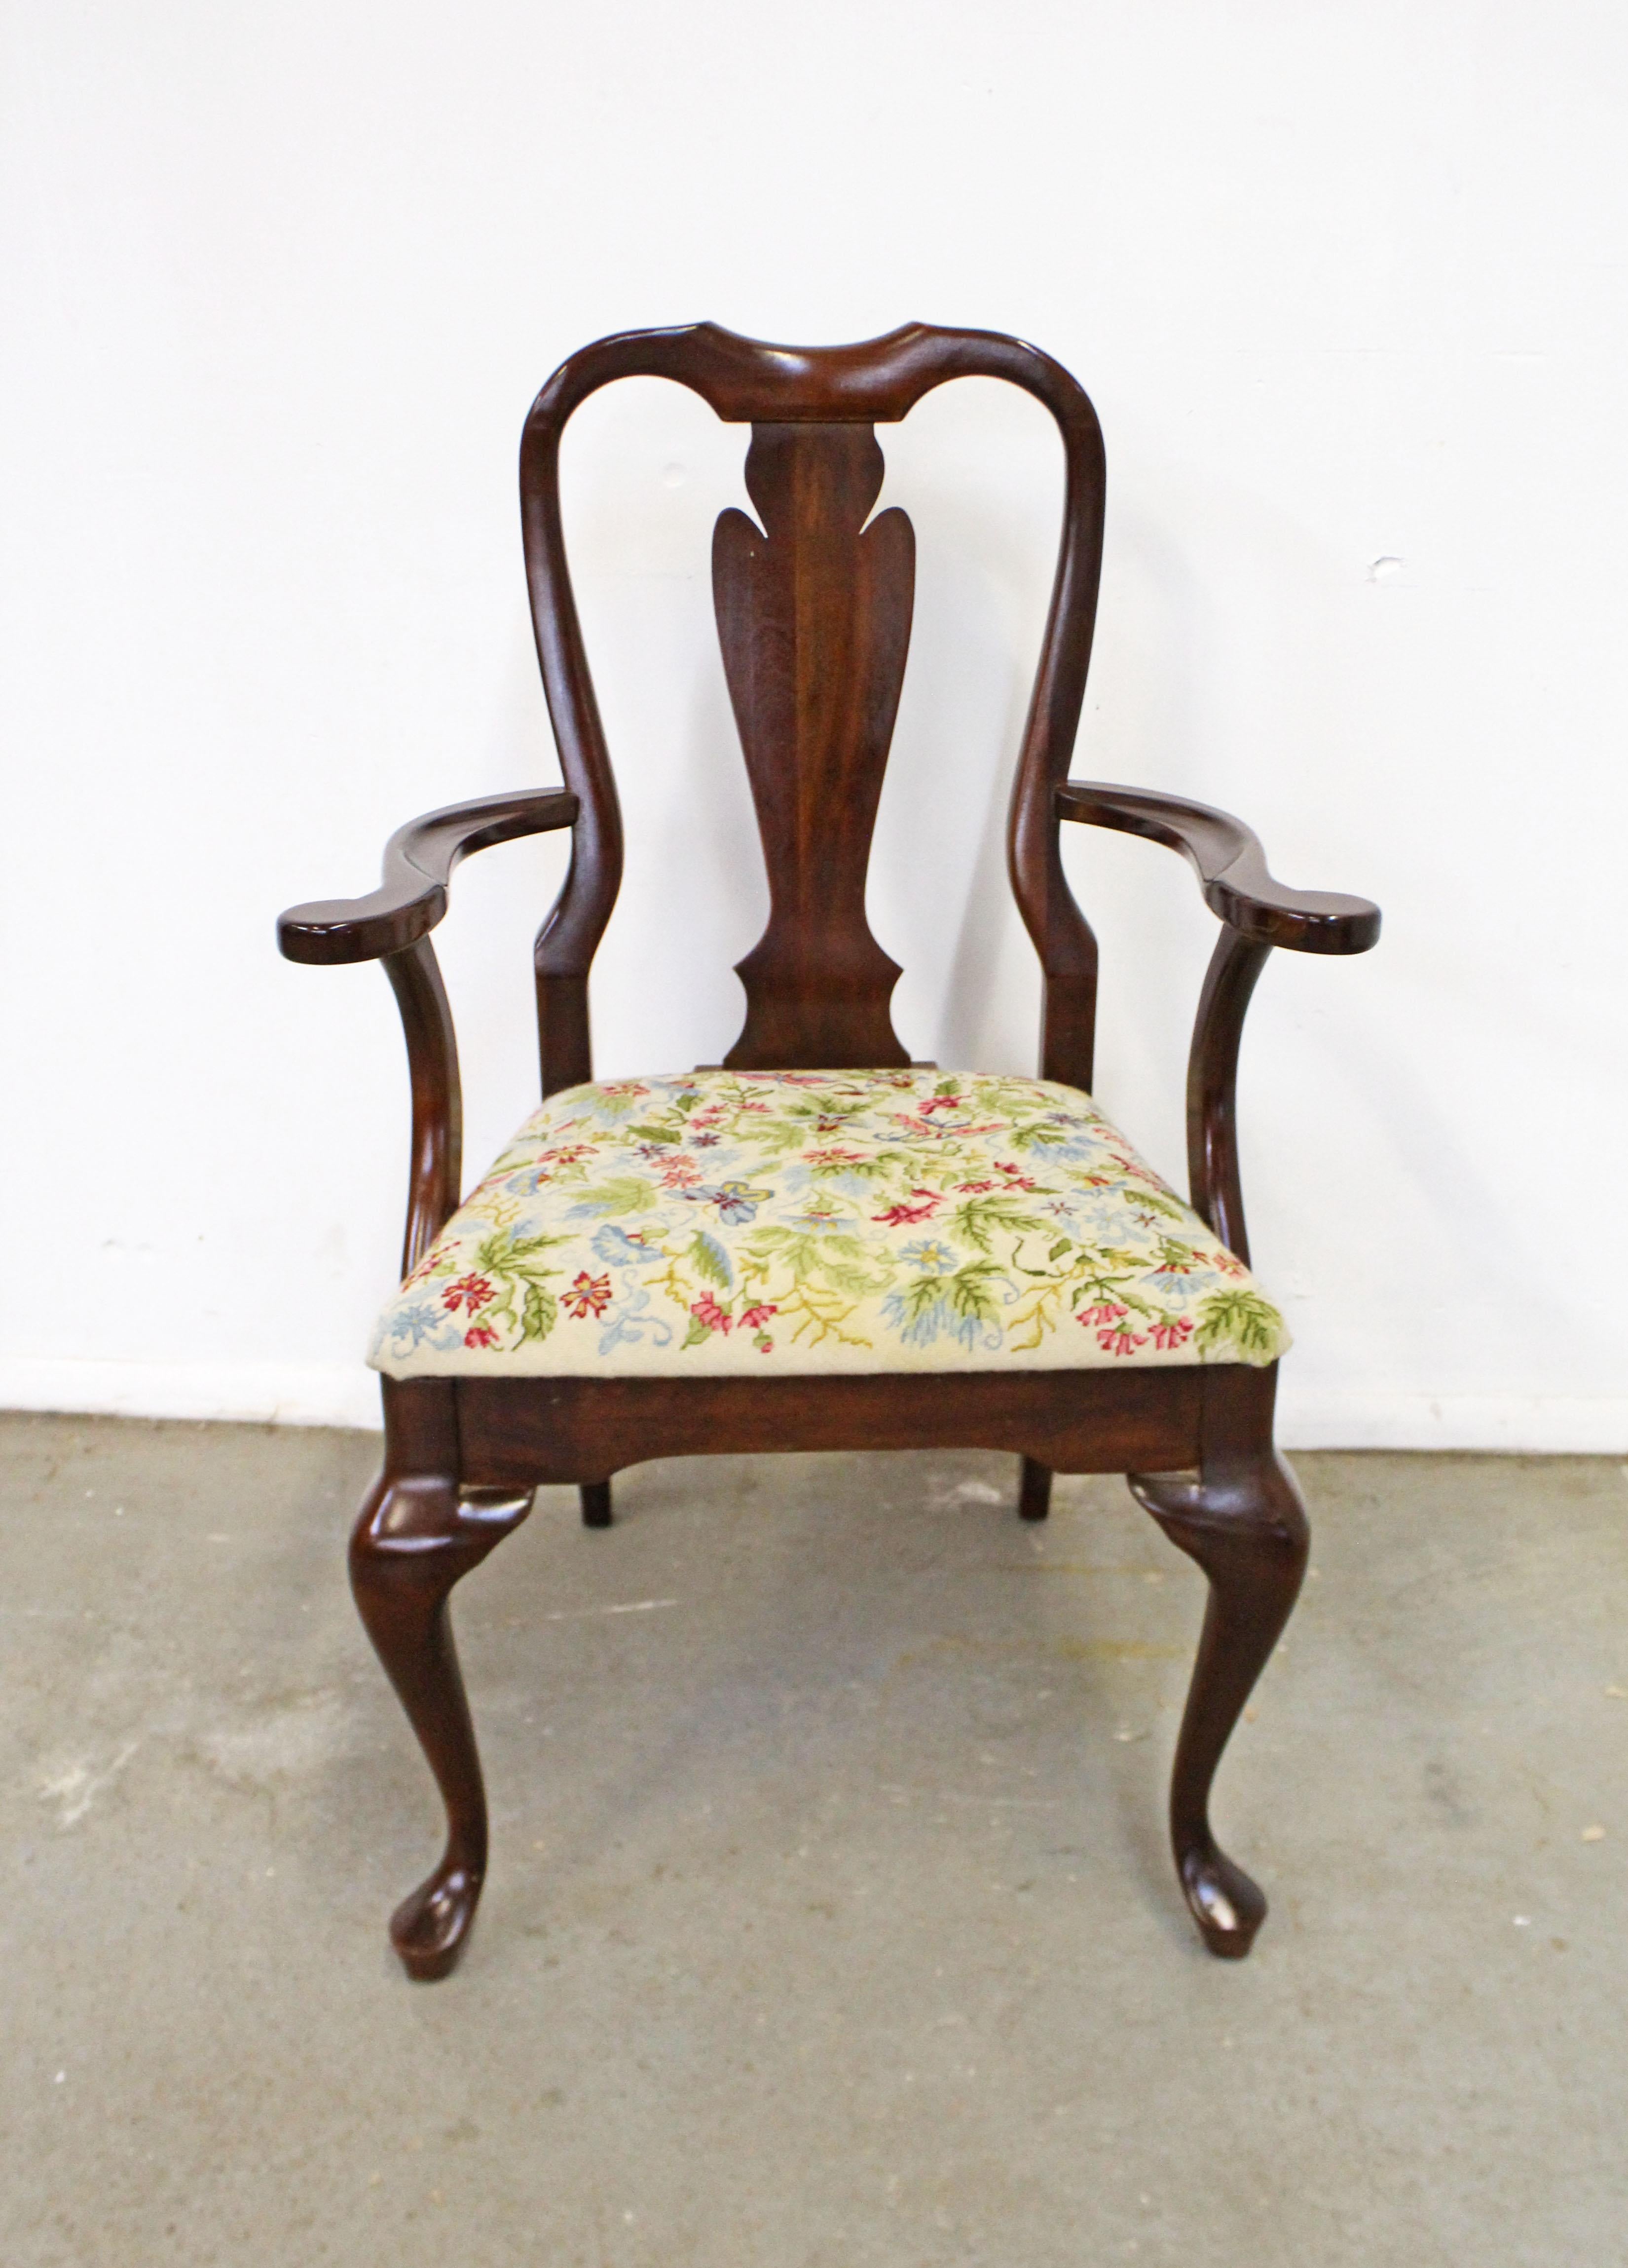 Offered is a vintage Queen Anne arm chair. It's made of solid cherry wood and has a beautifully stitched floral upholstered seat. In good condition for its age, with some slight surface scratches/wear on the wood. The upholstery is in good